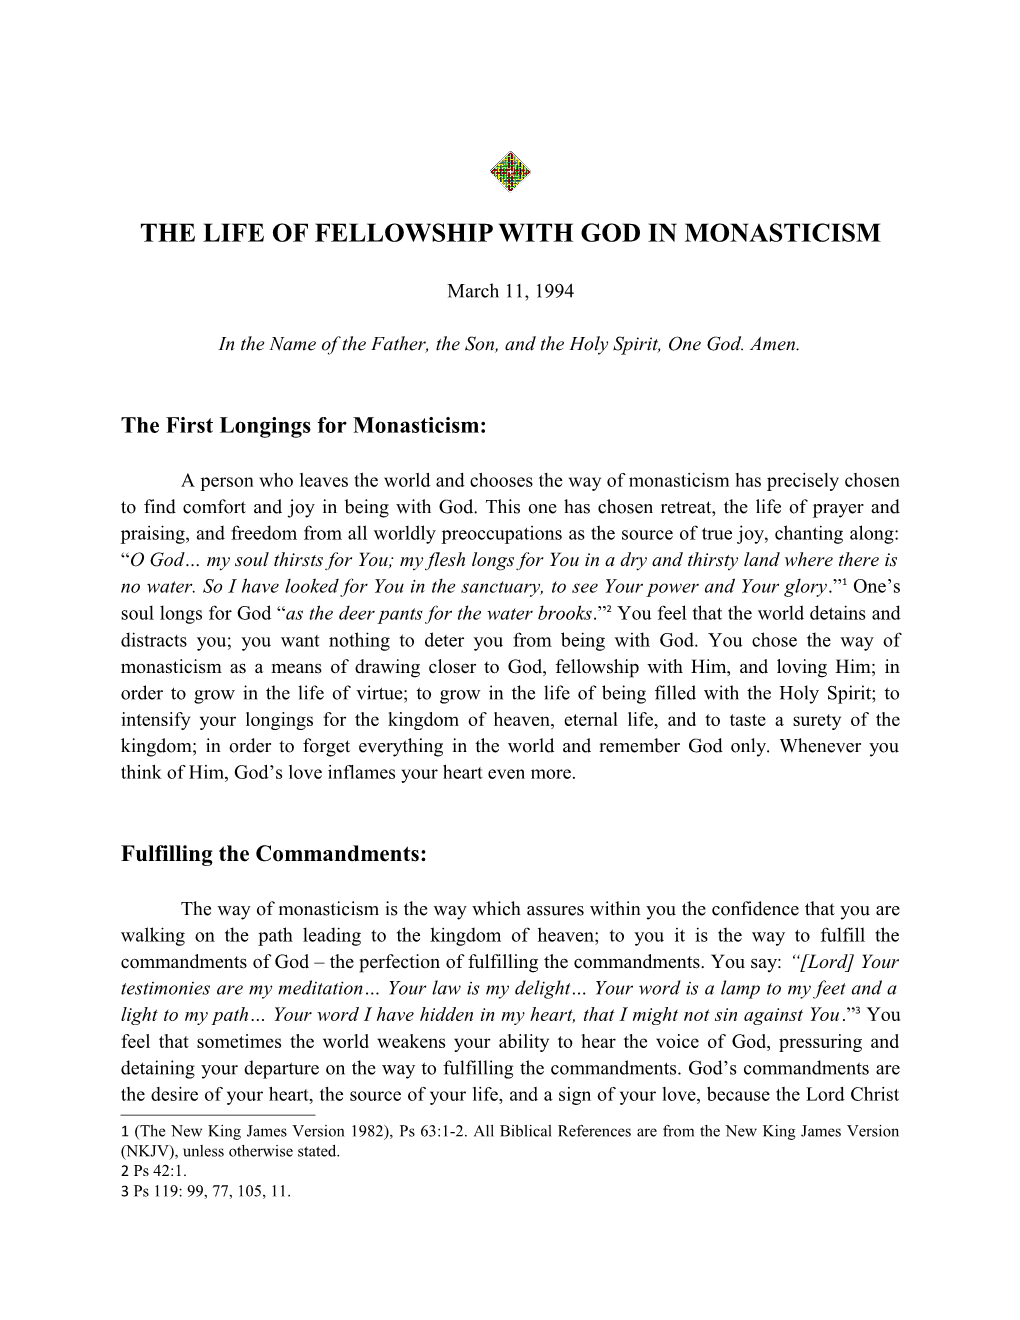 The Life of Fellowship with God in Monasticism